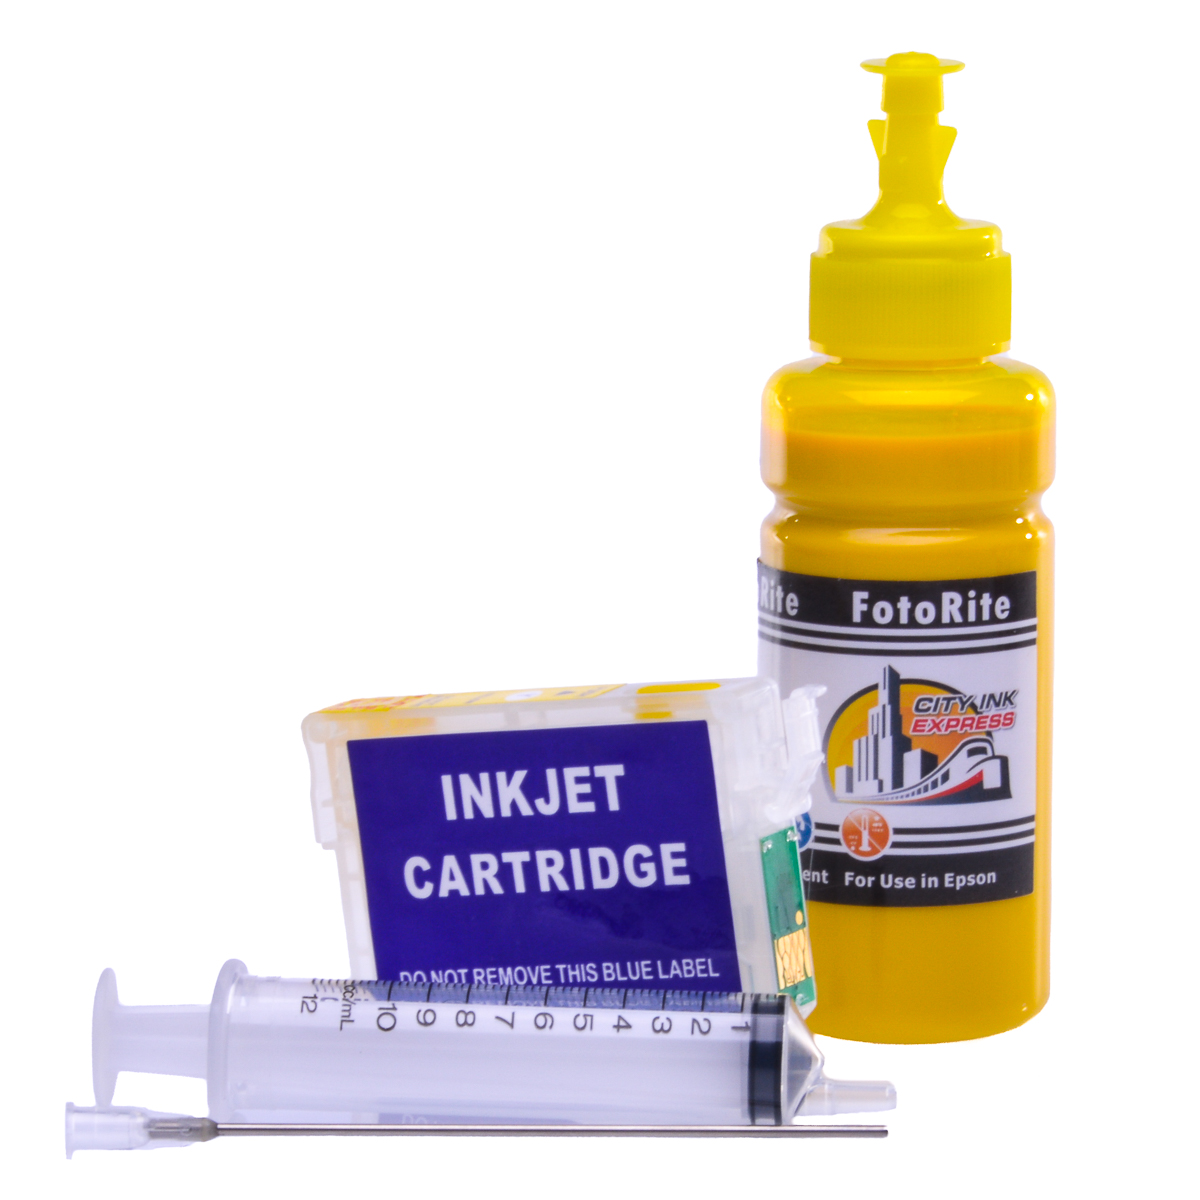 Refillable pigment Cheap printer cartridges for Epson Stylus 1400 Owl Inks T0794 - CT07944010 Yellow